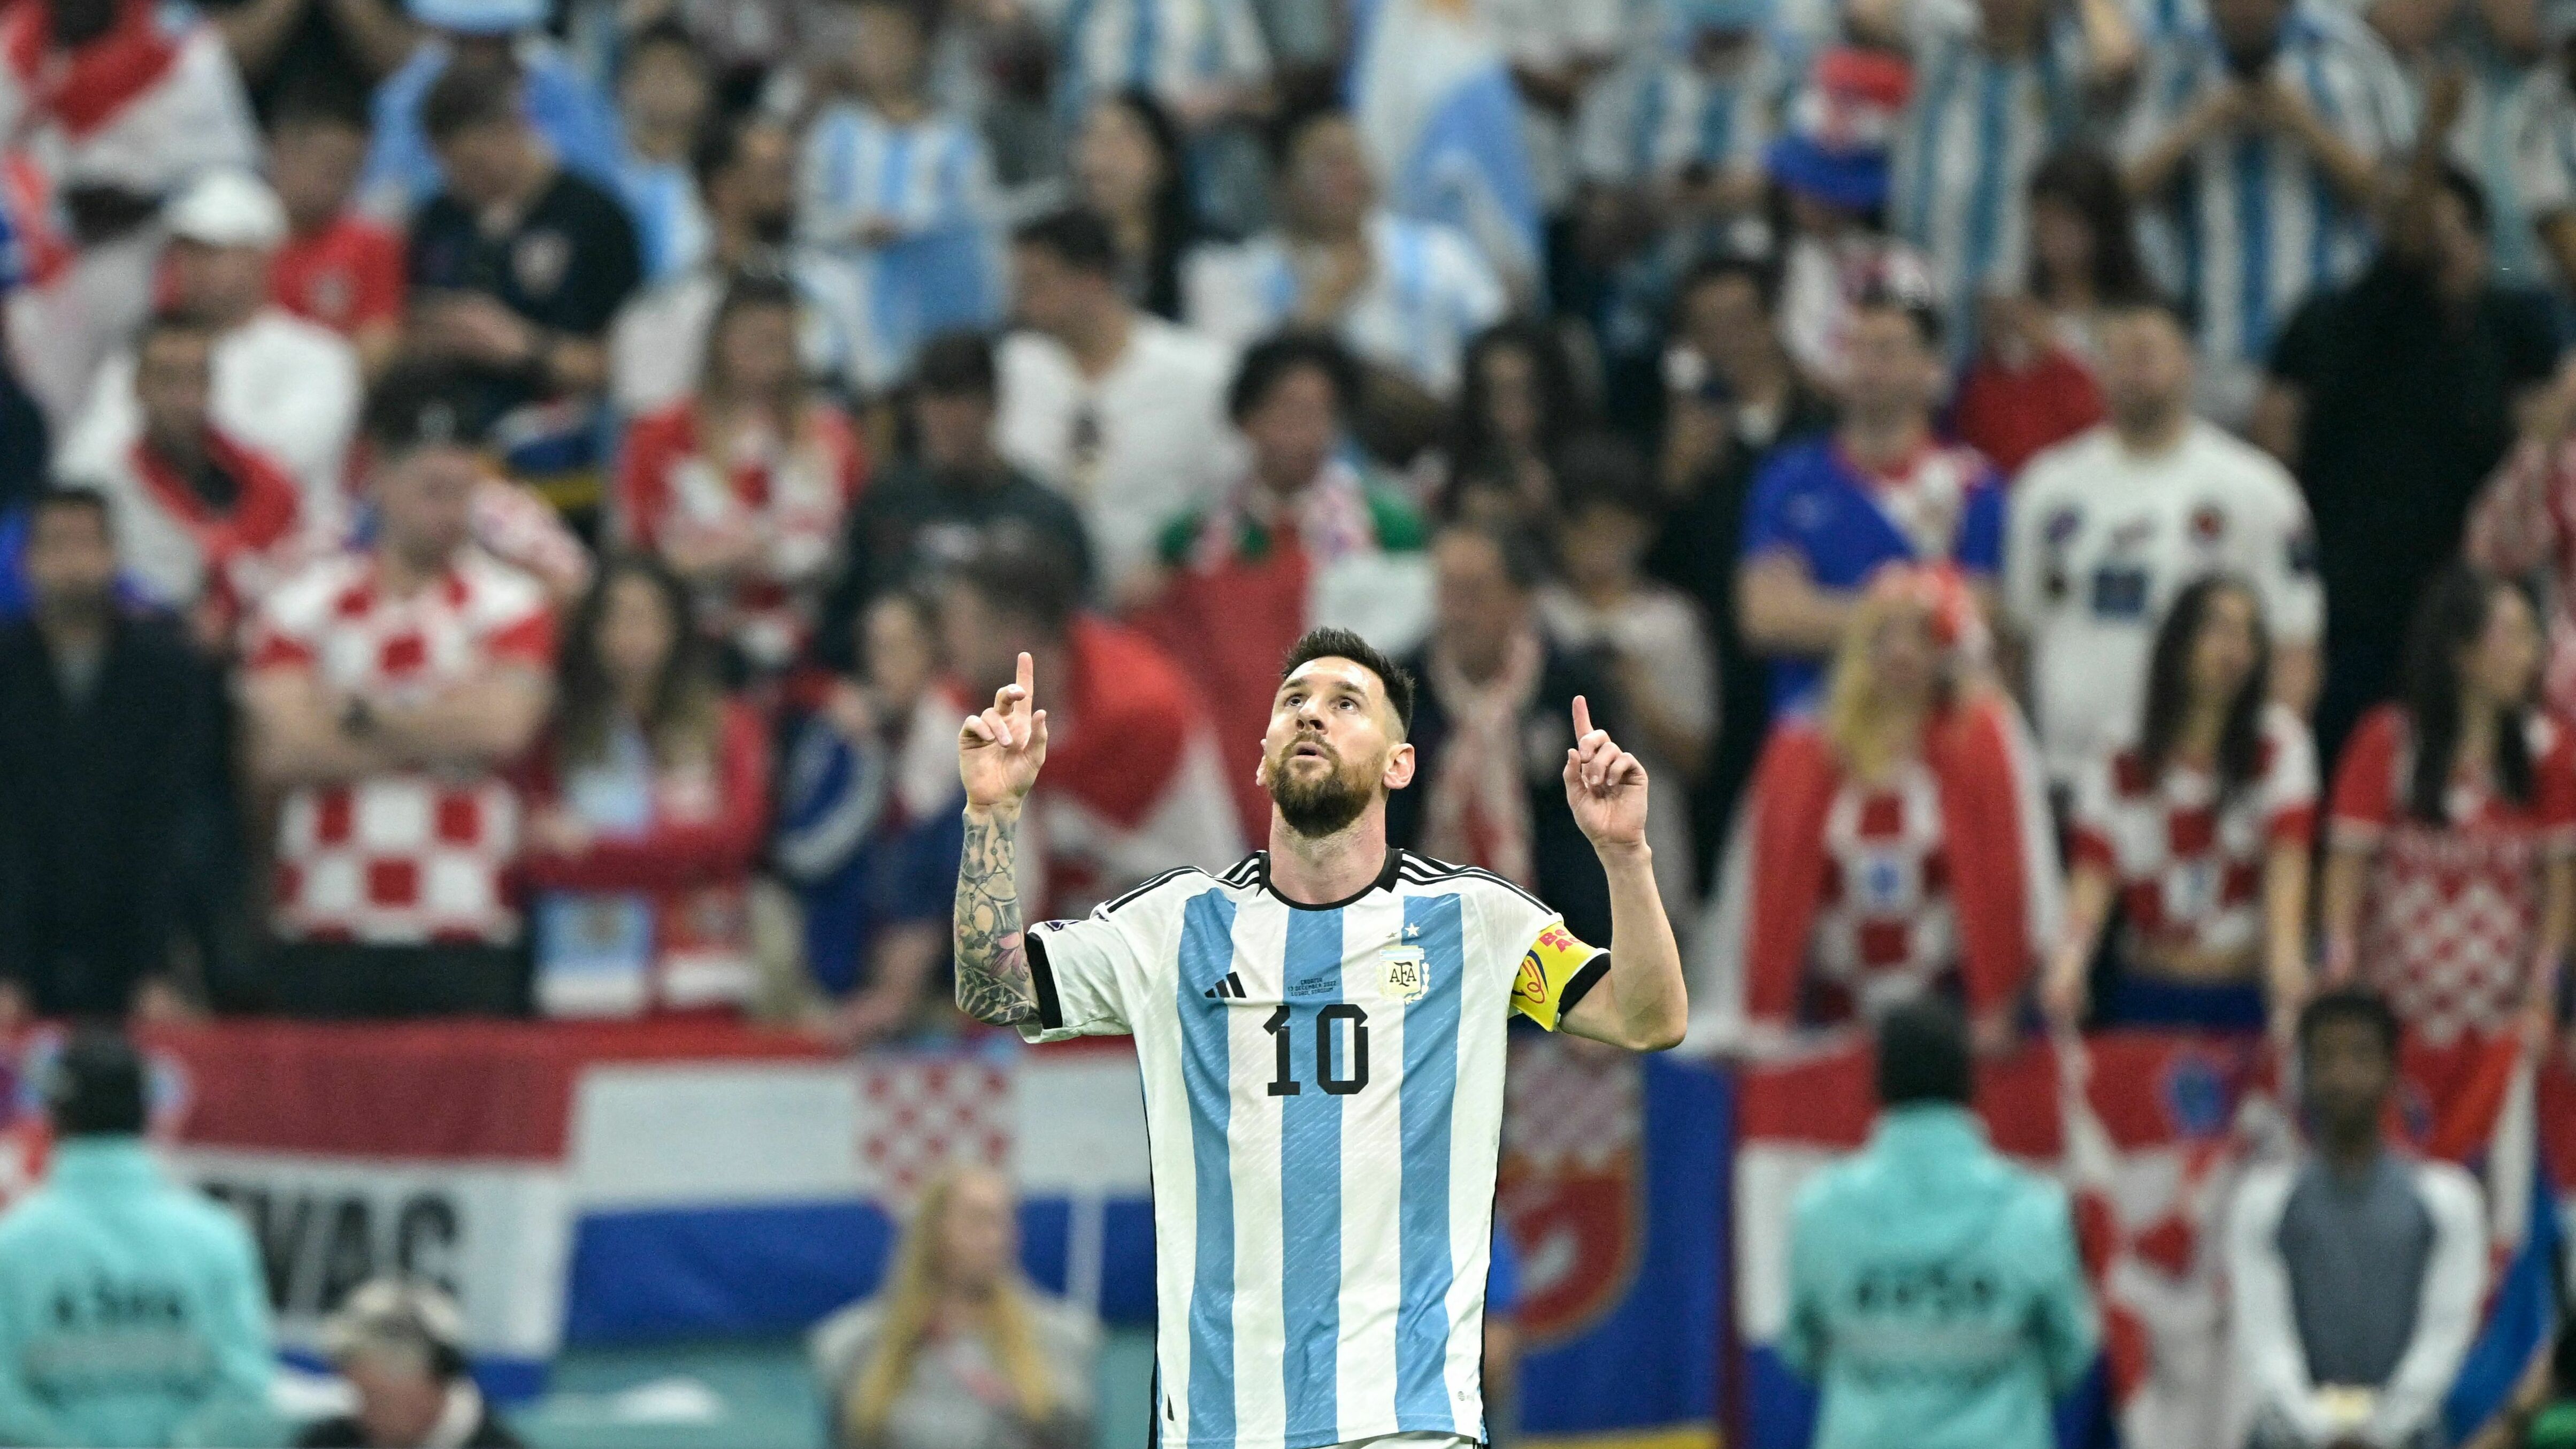 Messis dream lives on as Argentina defeats Croatia to reach the World Cup final